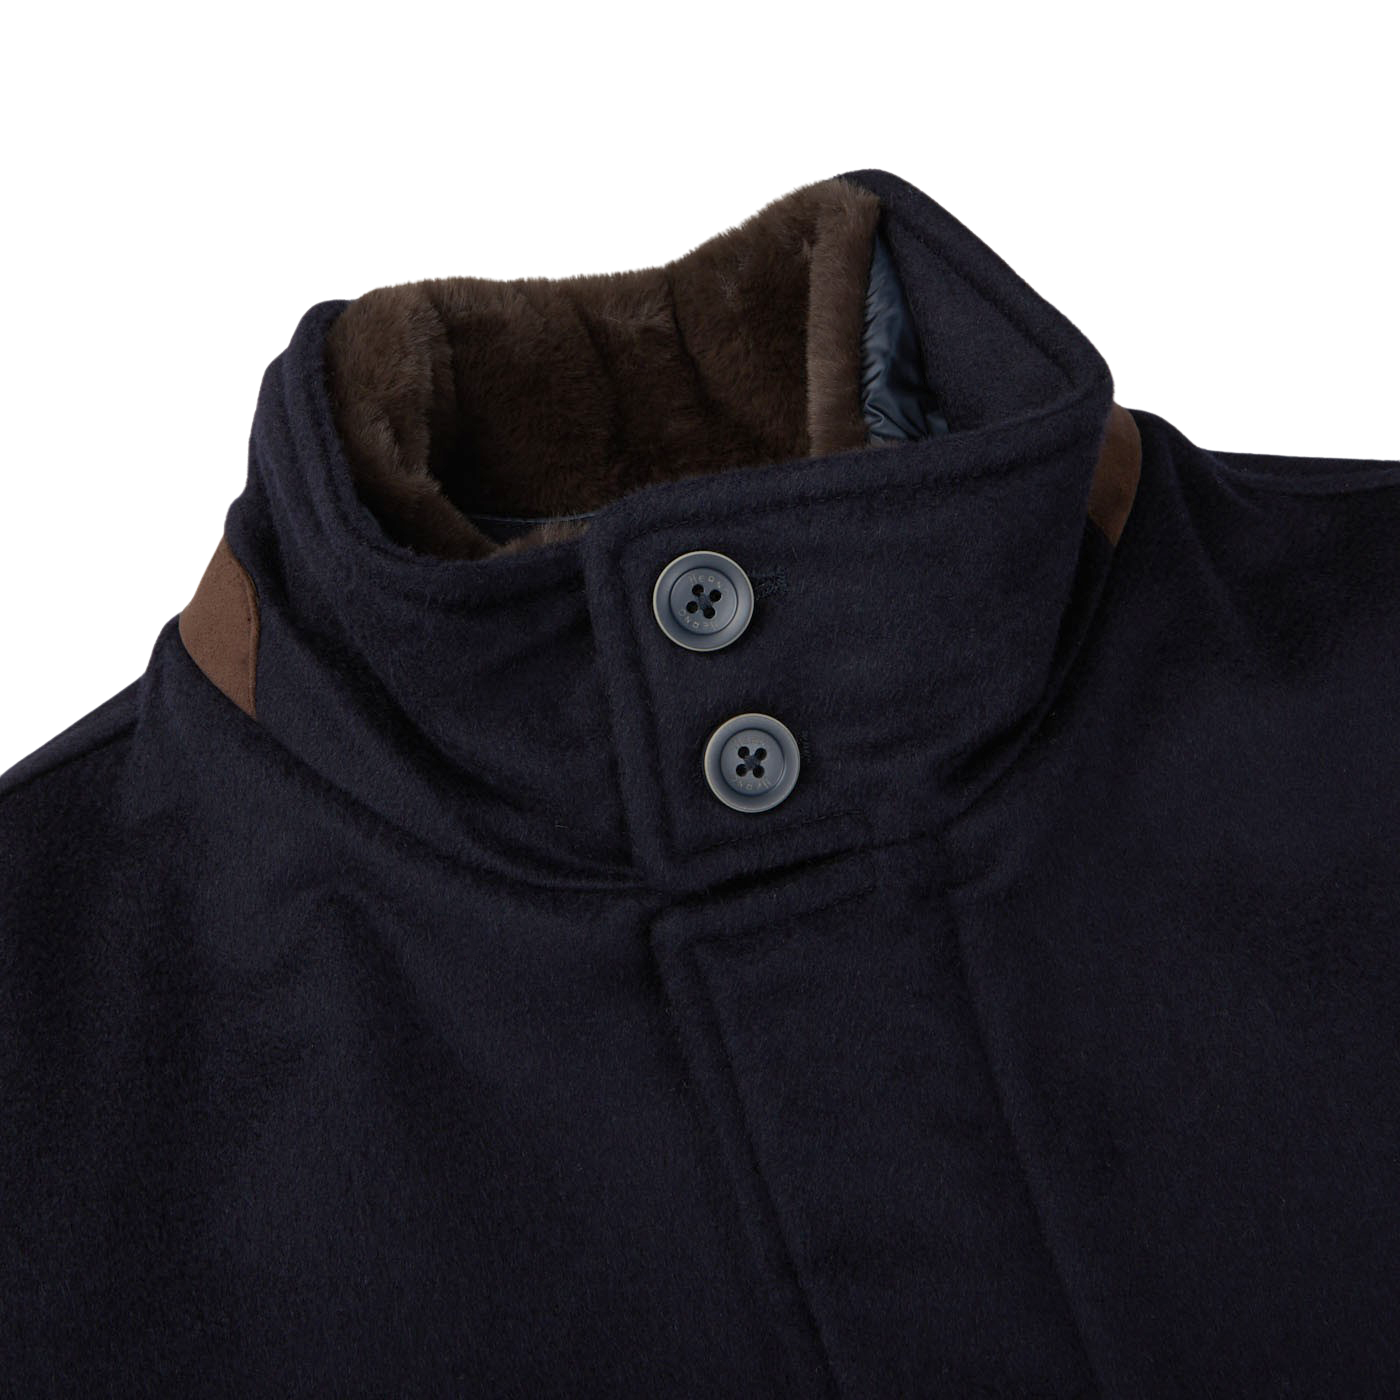 The Navy Blue Water Repellent Cashmere Car Coat with a brown collar from Herno features a weather storm system.